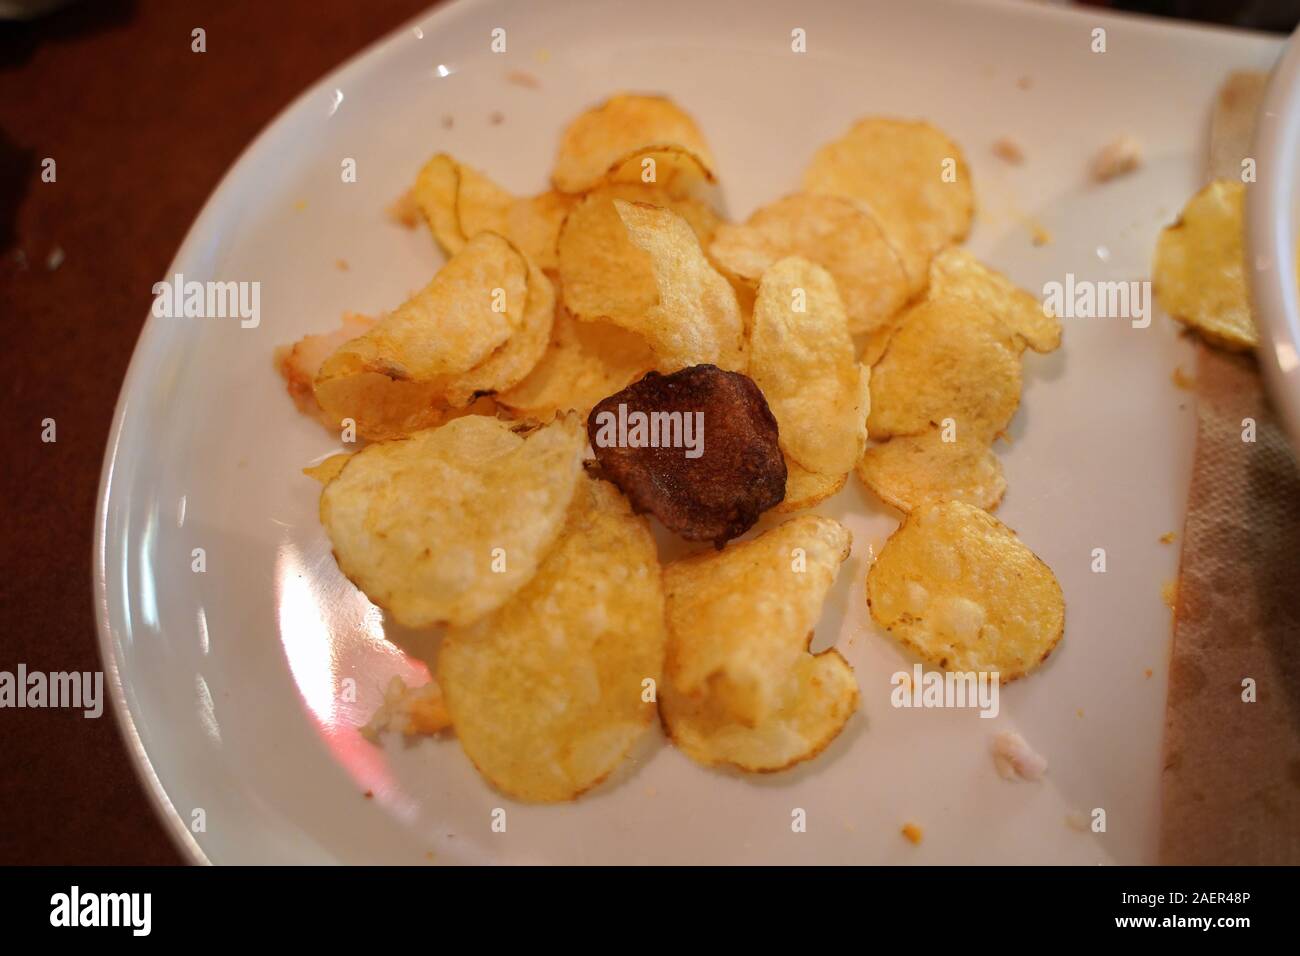 A lone burnt oily potato chip sticking out among the properly fried ones on a plate. Stock Photo